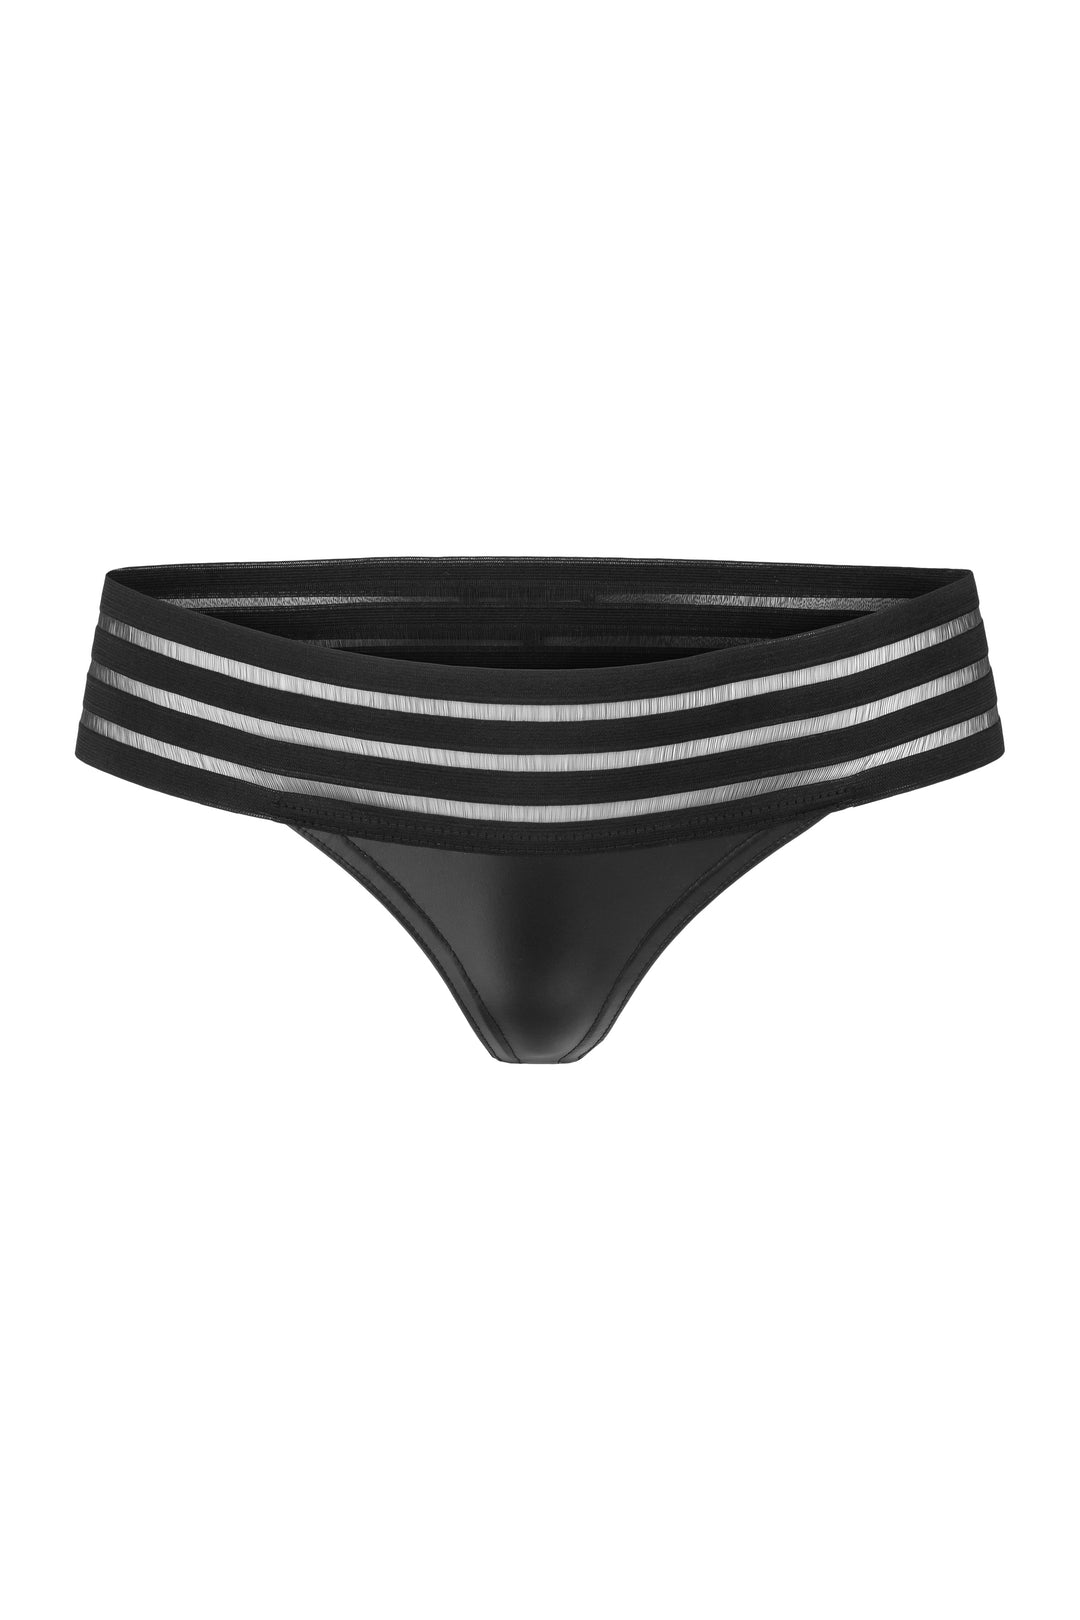 Power Wet Look panty with elastic tape